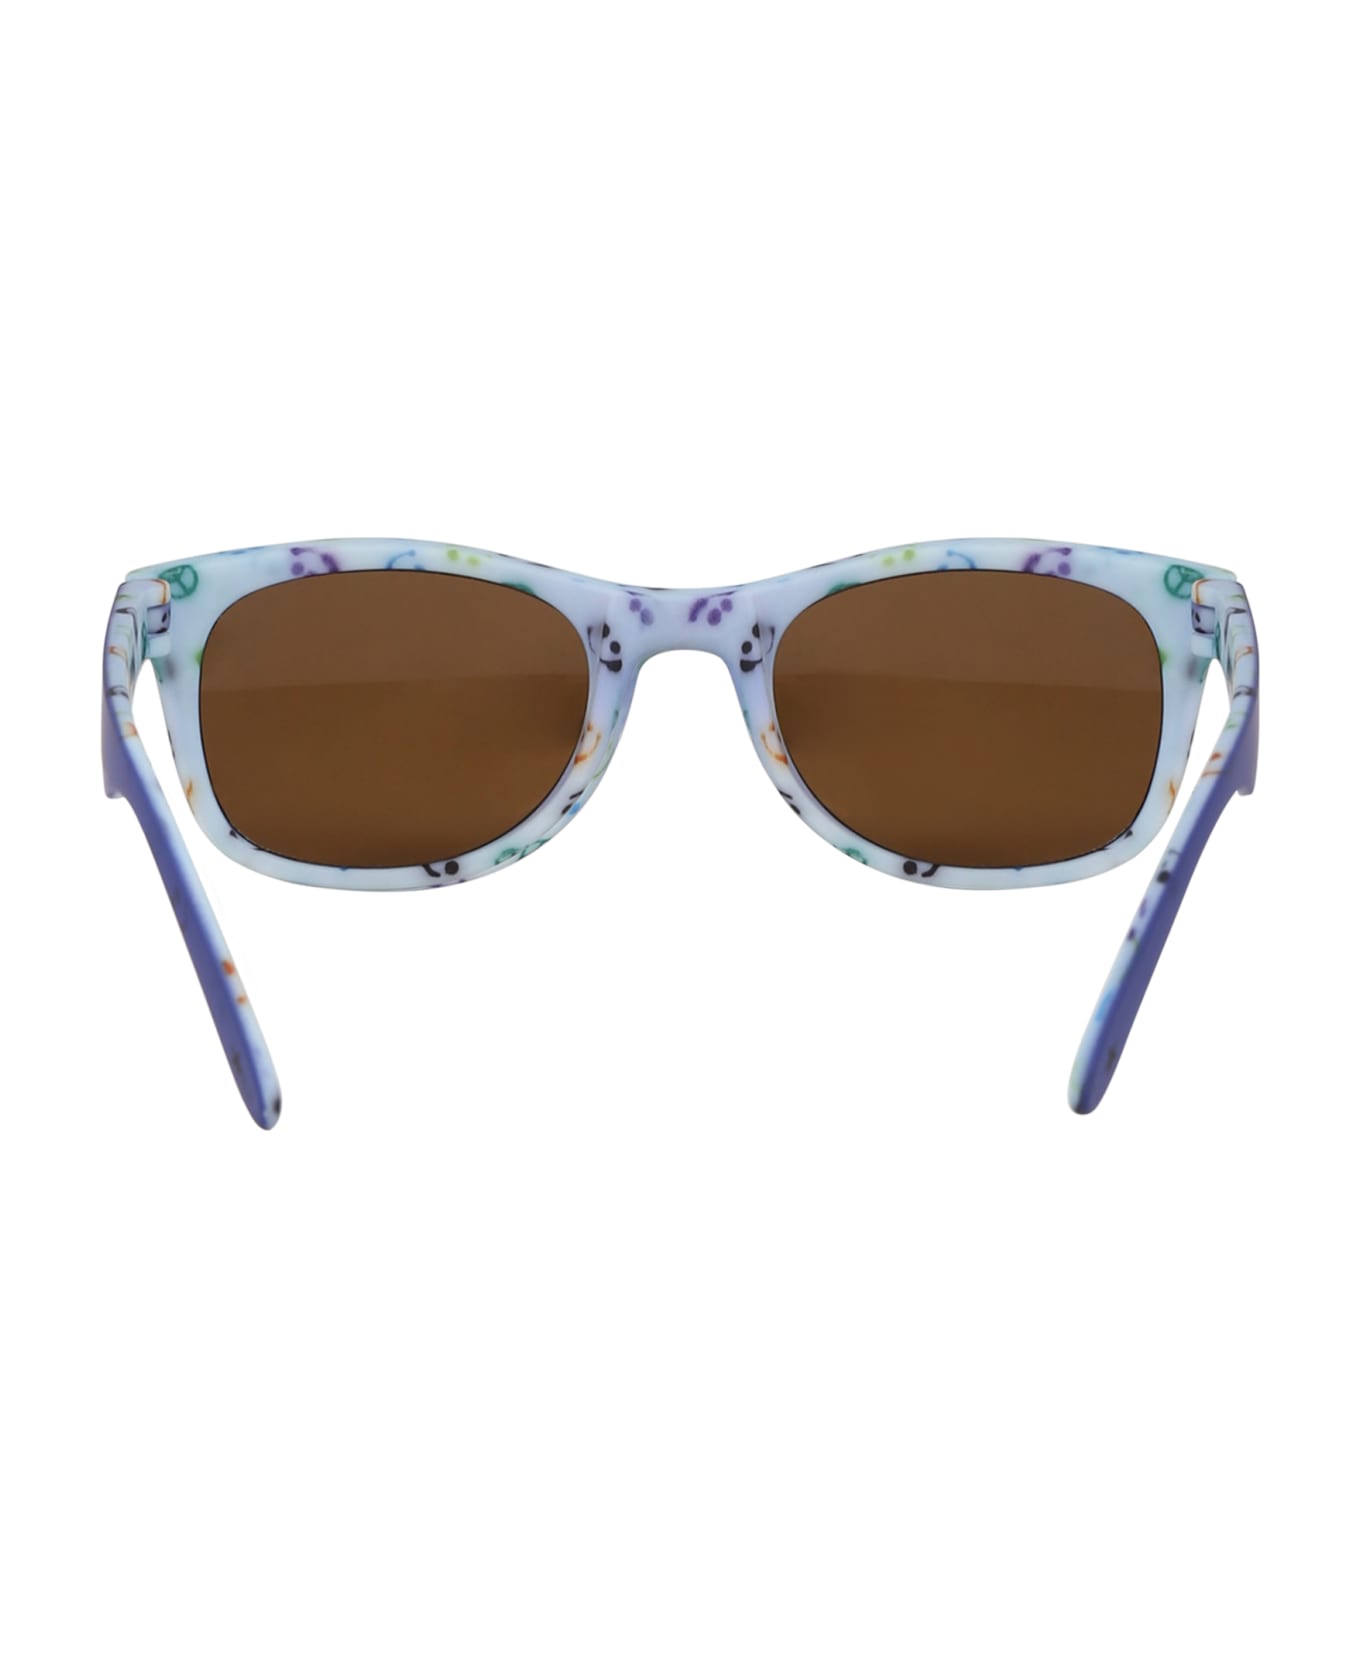 Molo Blue Star Sunglasses For Boy - Blue アクセサリー＆ギフト